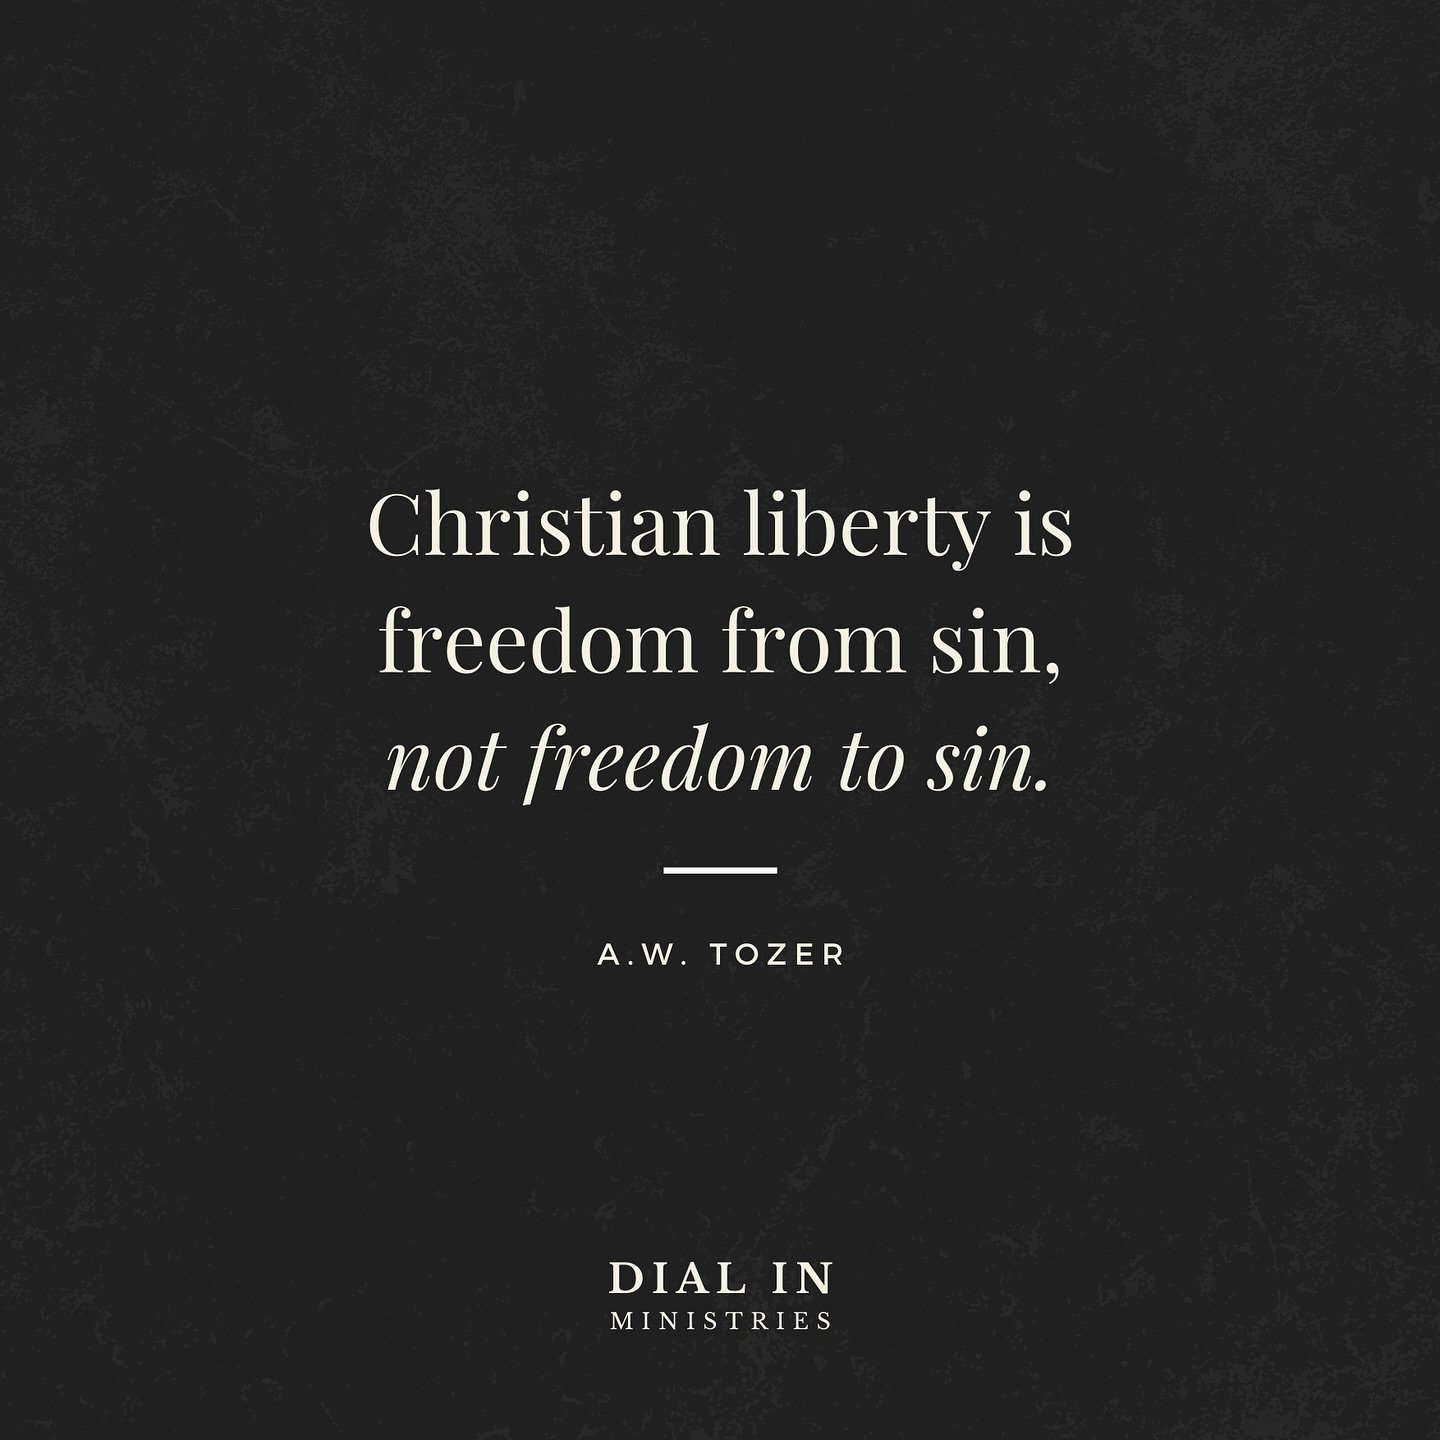 &ldquo;Christian liberty is freedom from sin, not freedom to sin.&rdquo; ~ A.W. Tozer